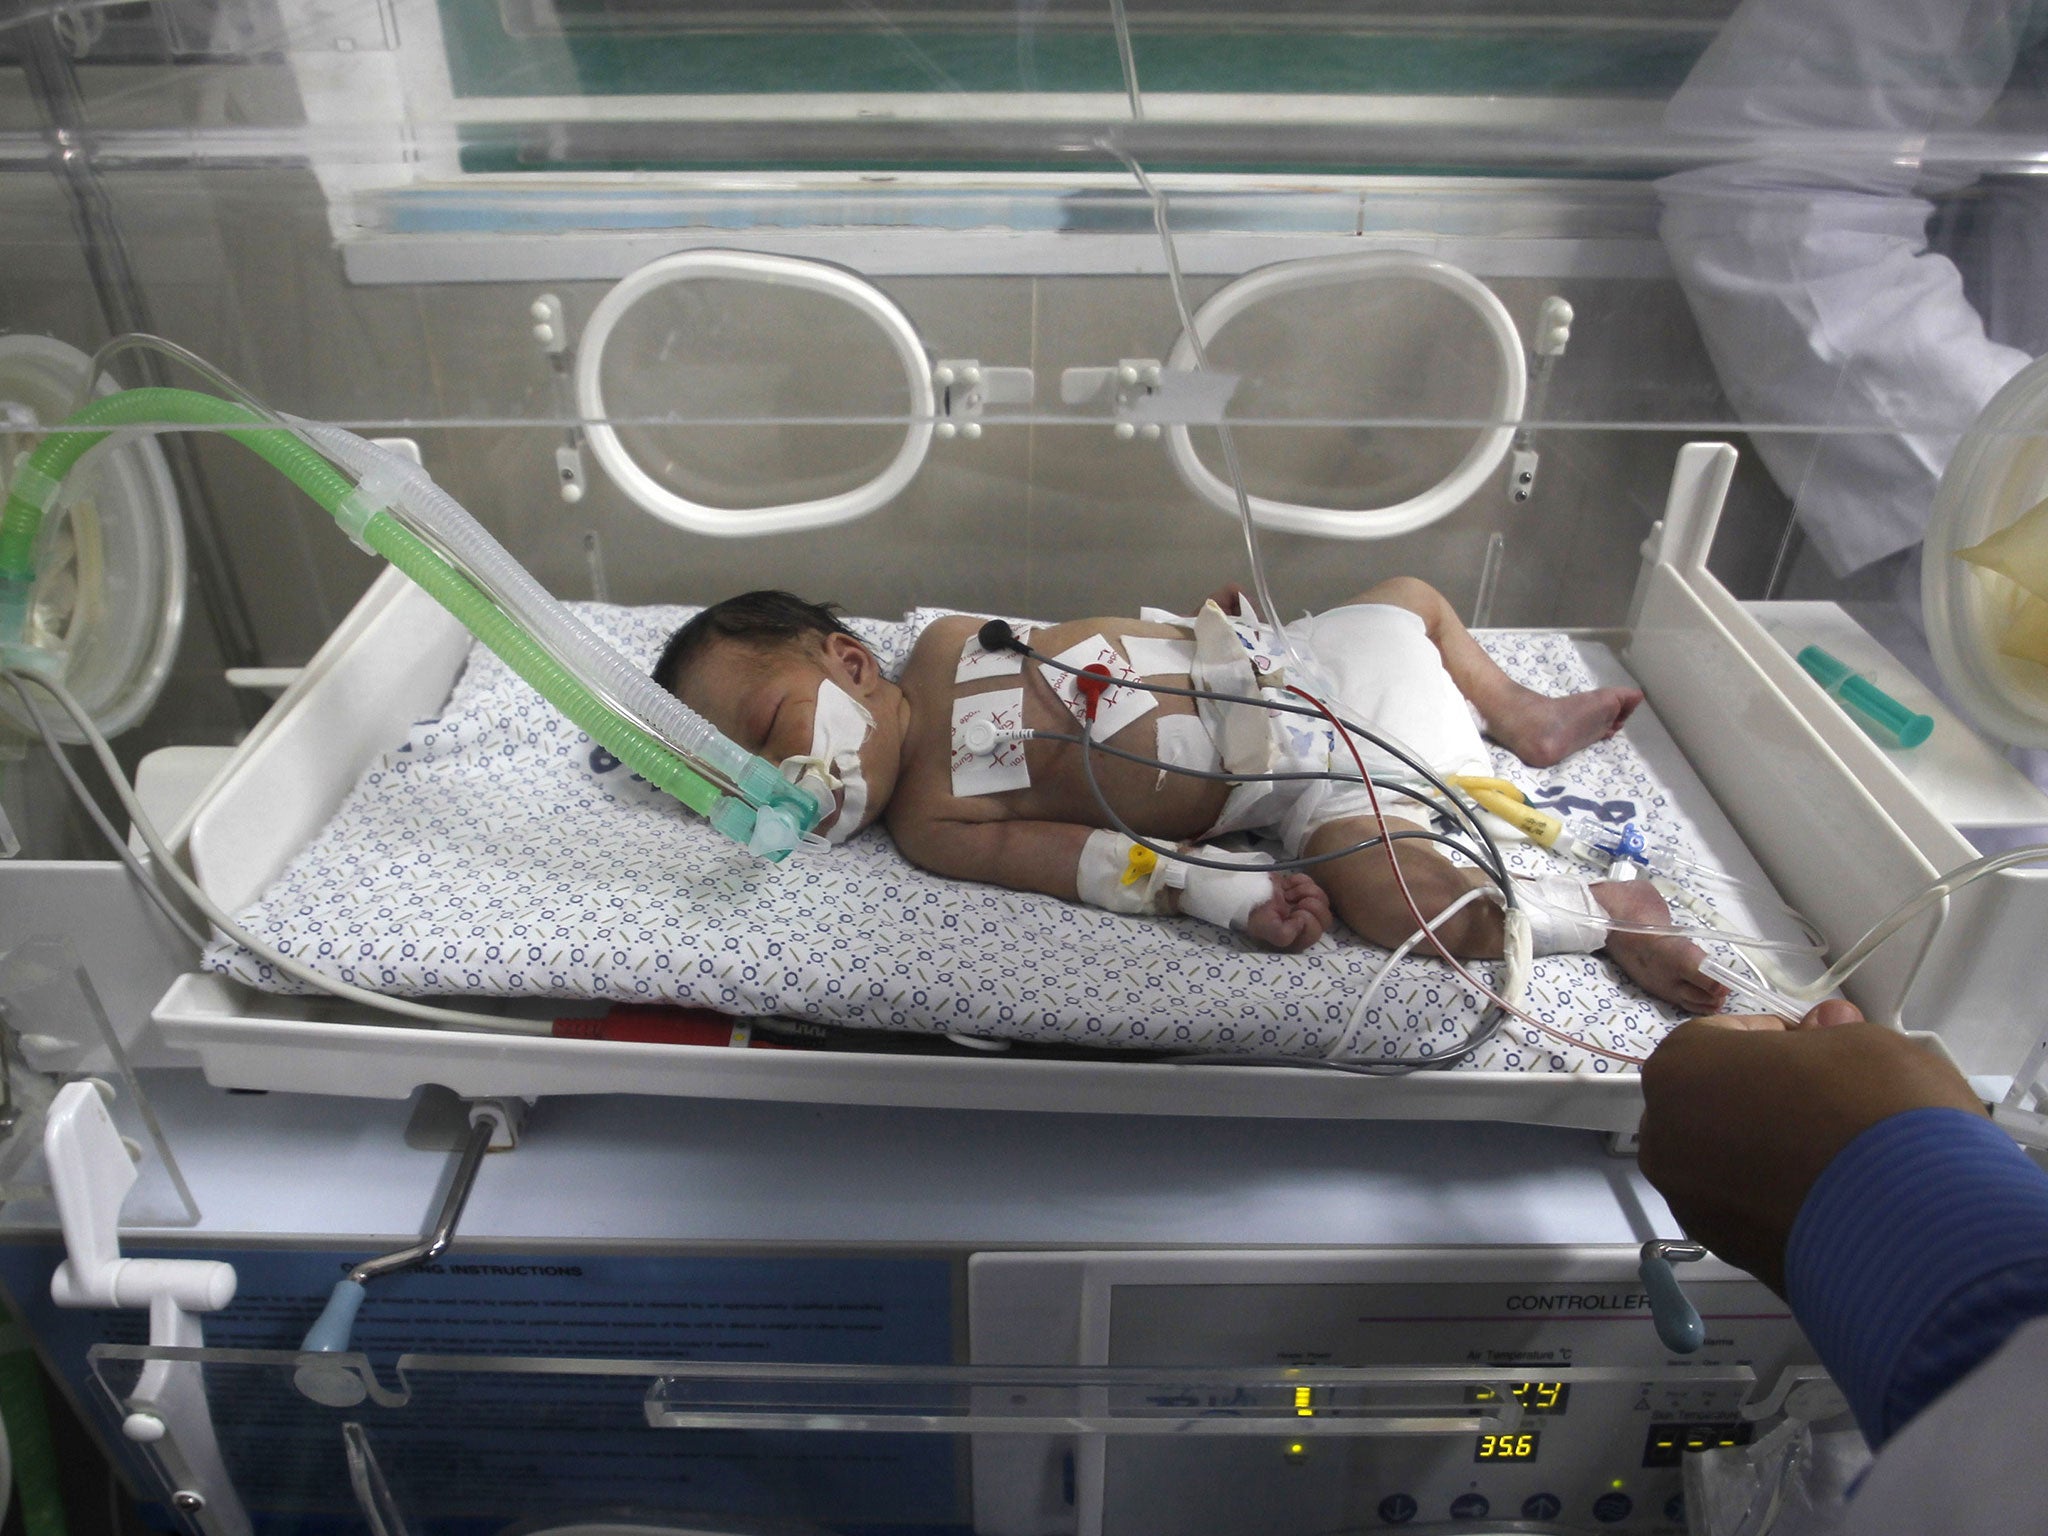 A Palestinian baby girl, Shayma Sheikh al-Eid, lies in an incubator at Nasser Hospital, two days after surgeons delivered her after her 23-year-old mother died, on July 27, 2014